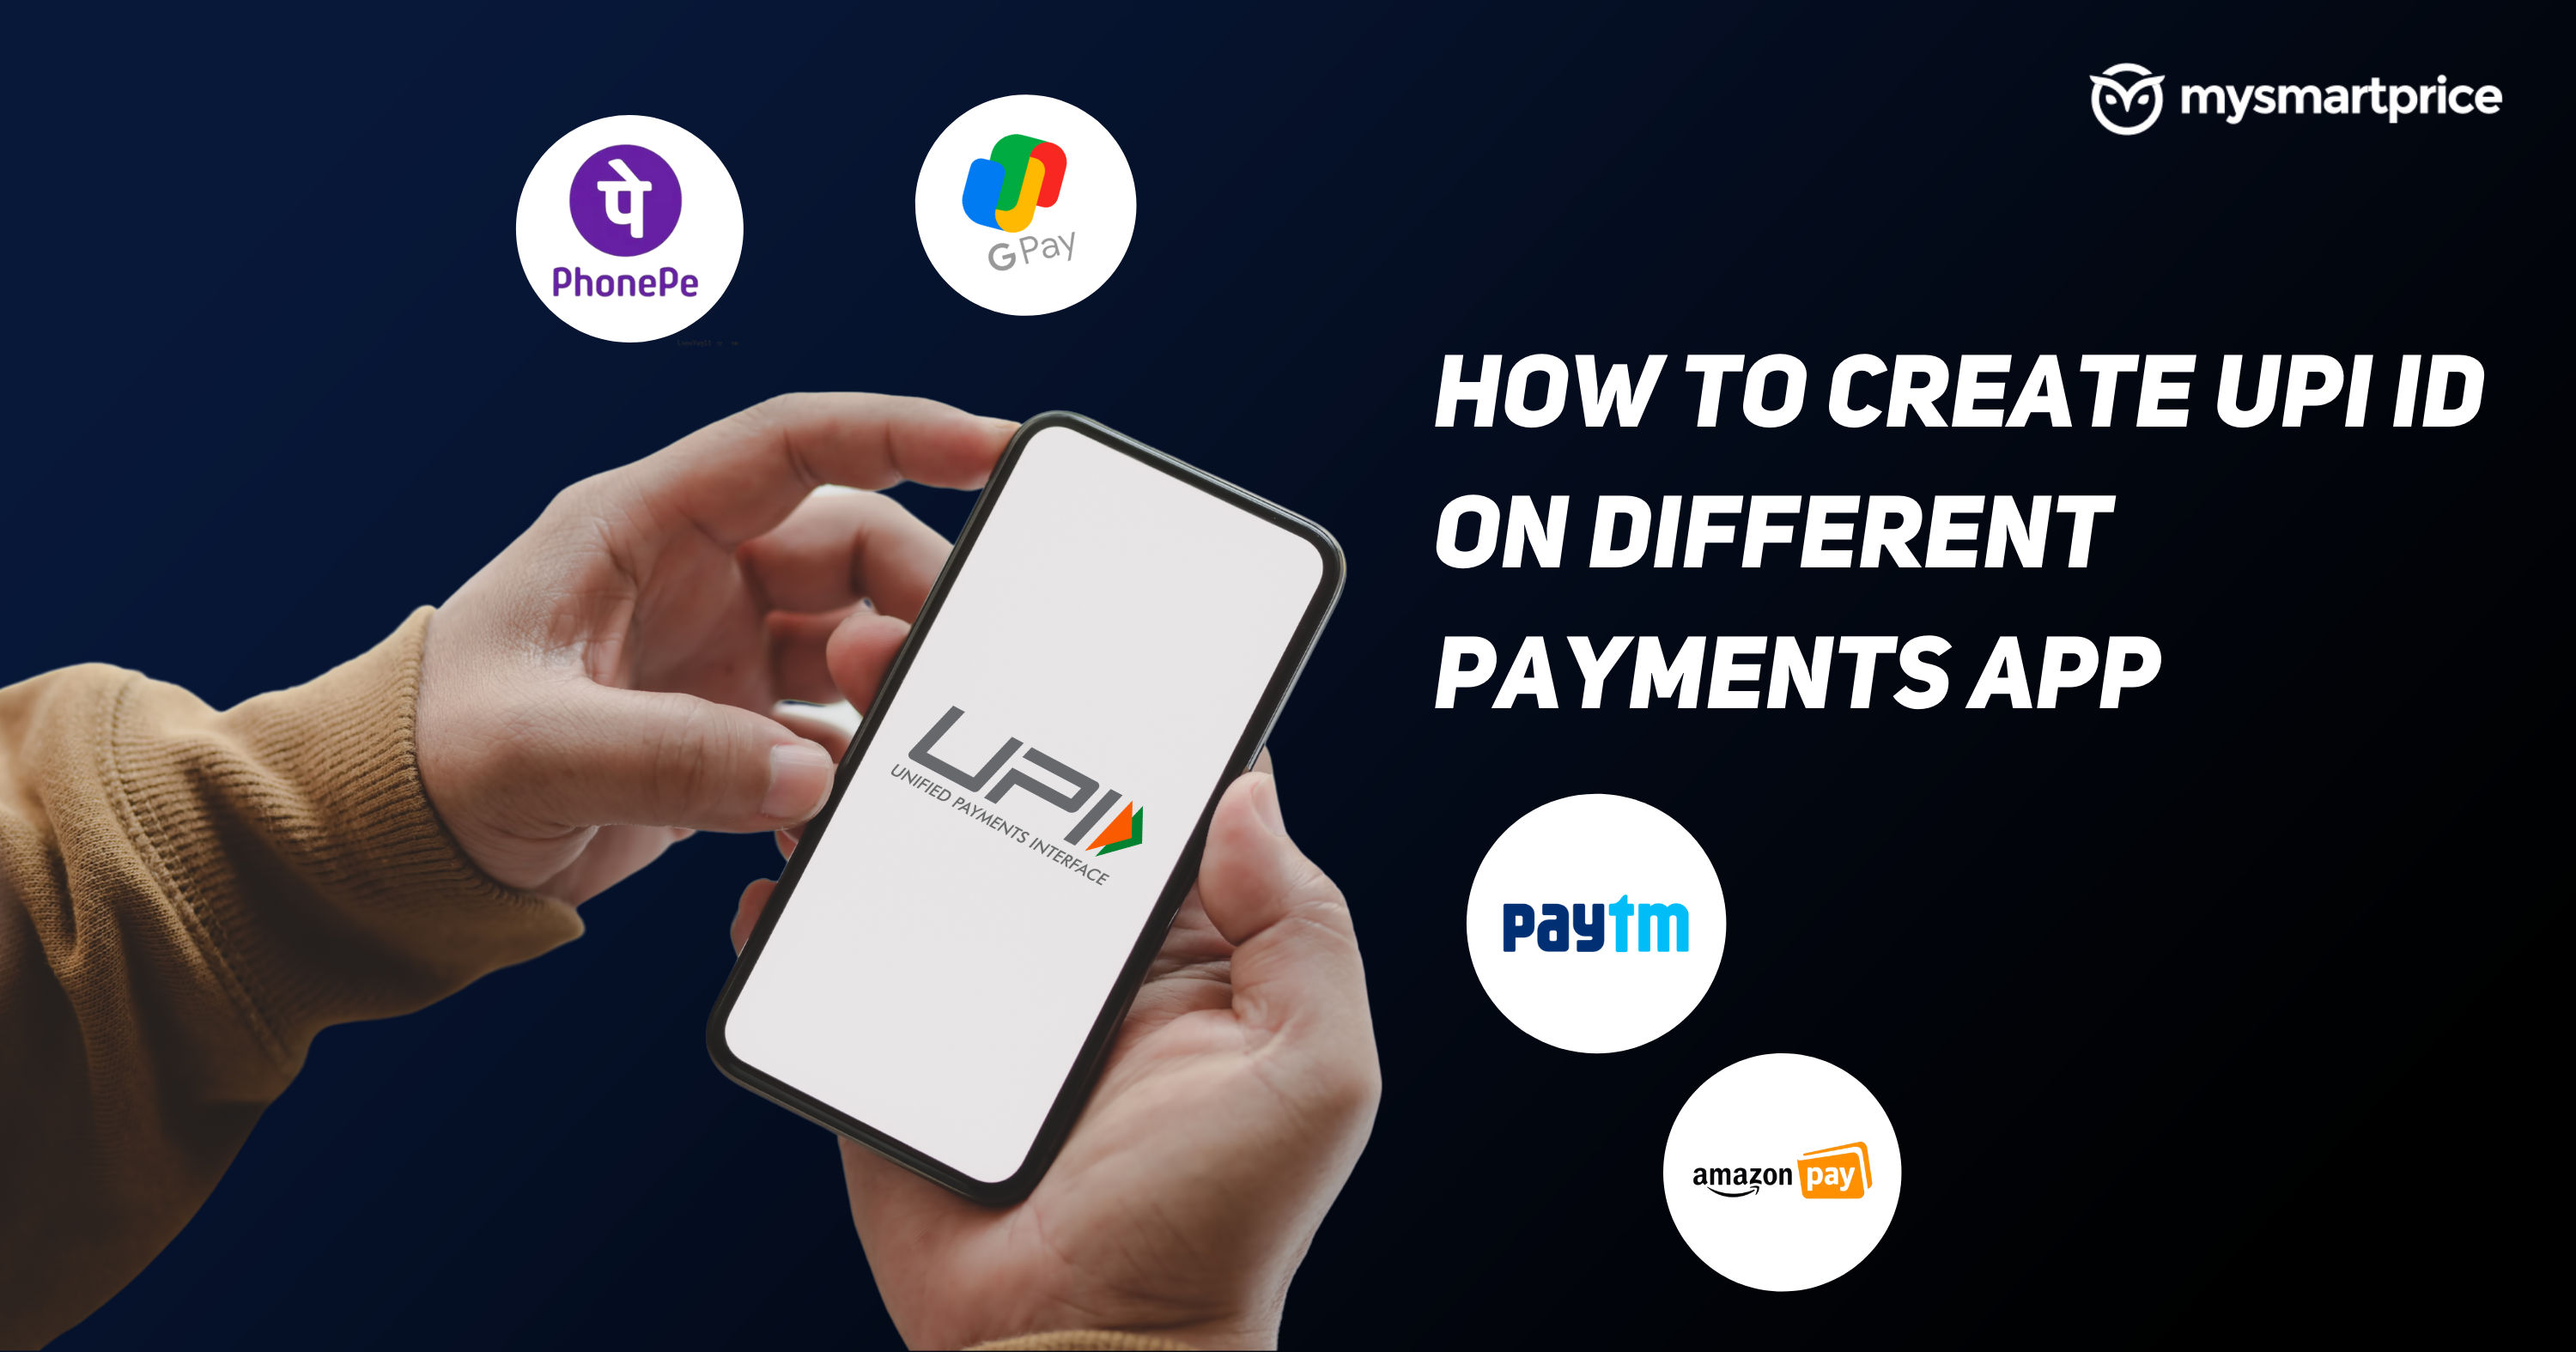 How to Create UPI ID in Google Pay, Paytm, PhonePe, Amazon Pay Payment Apps - MySmartPrice